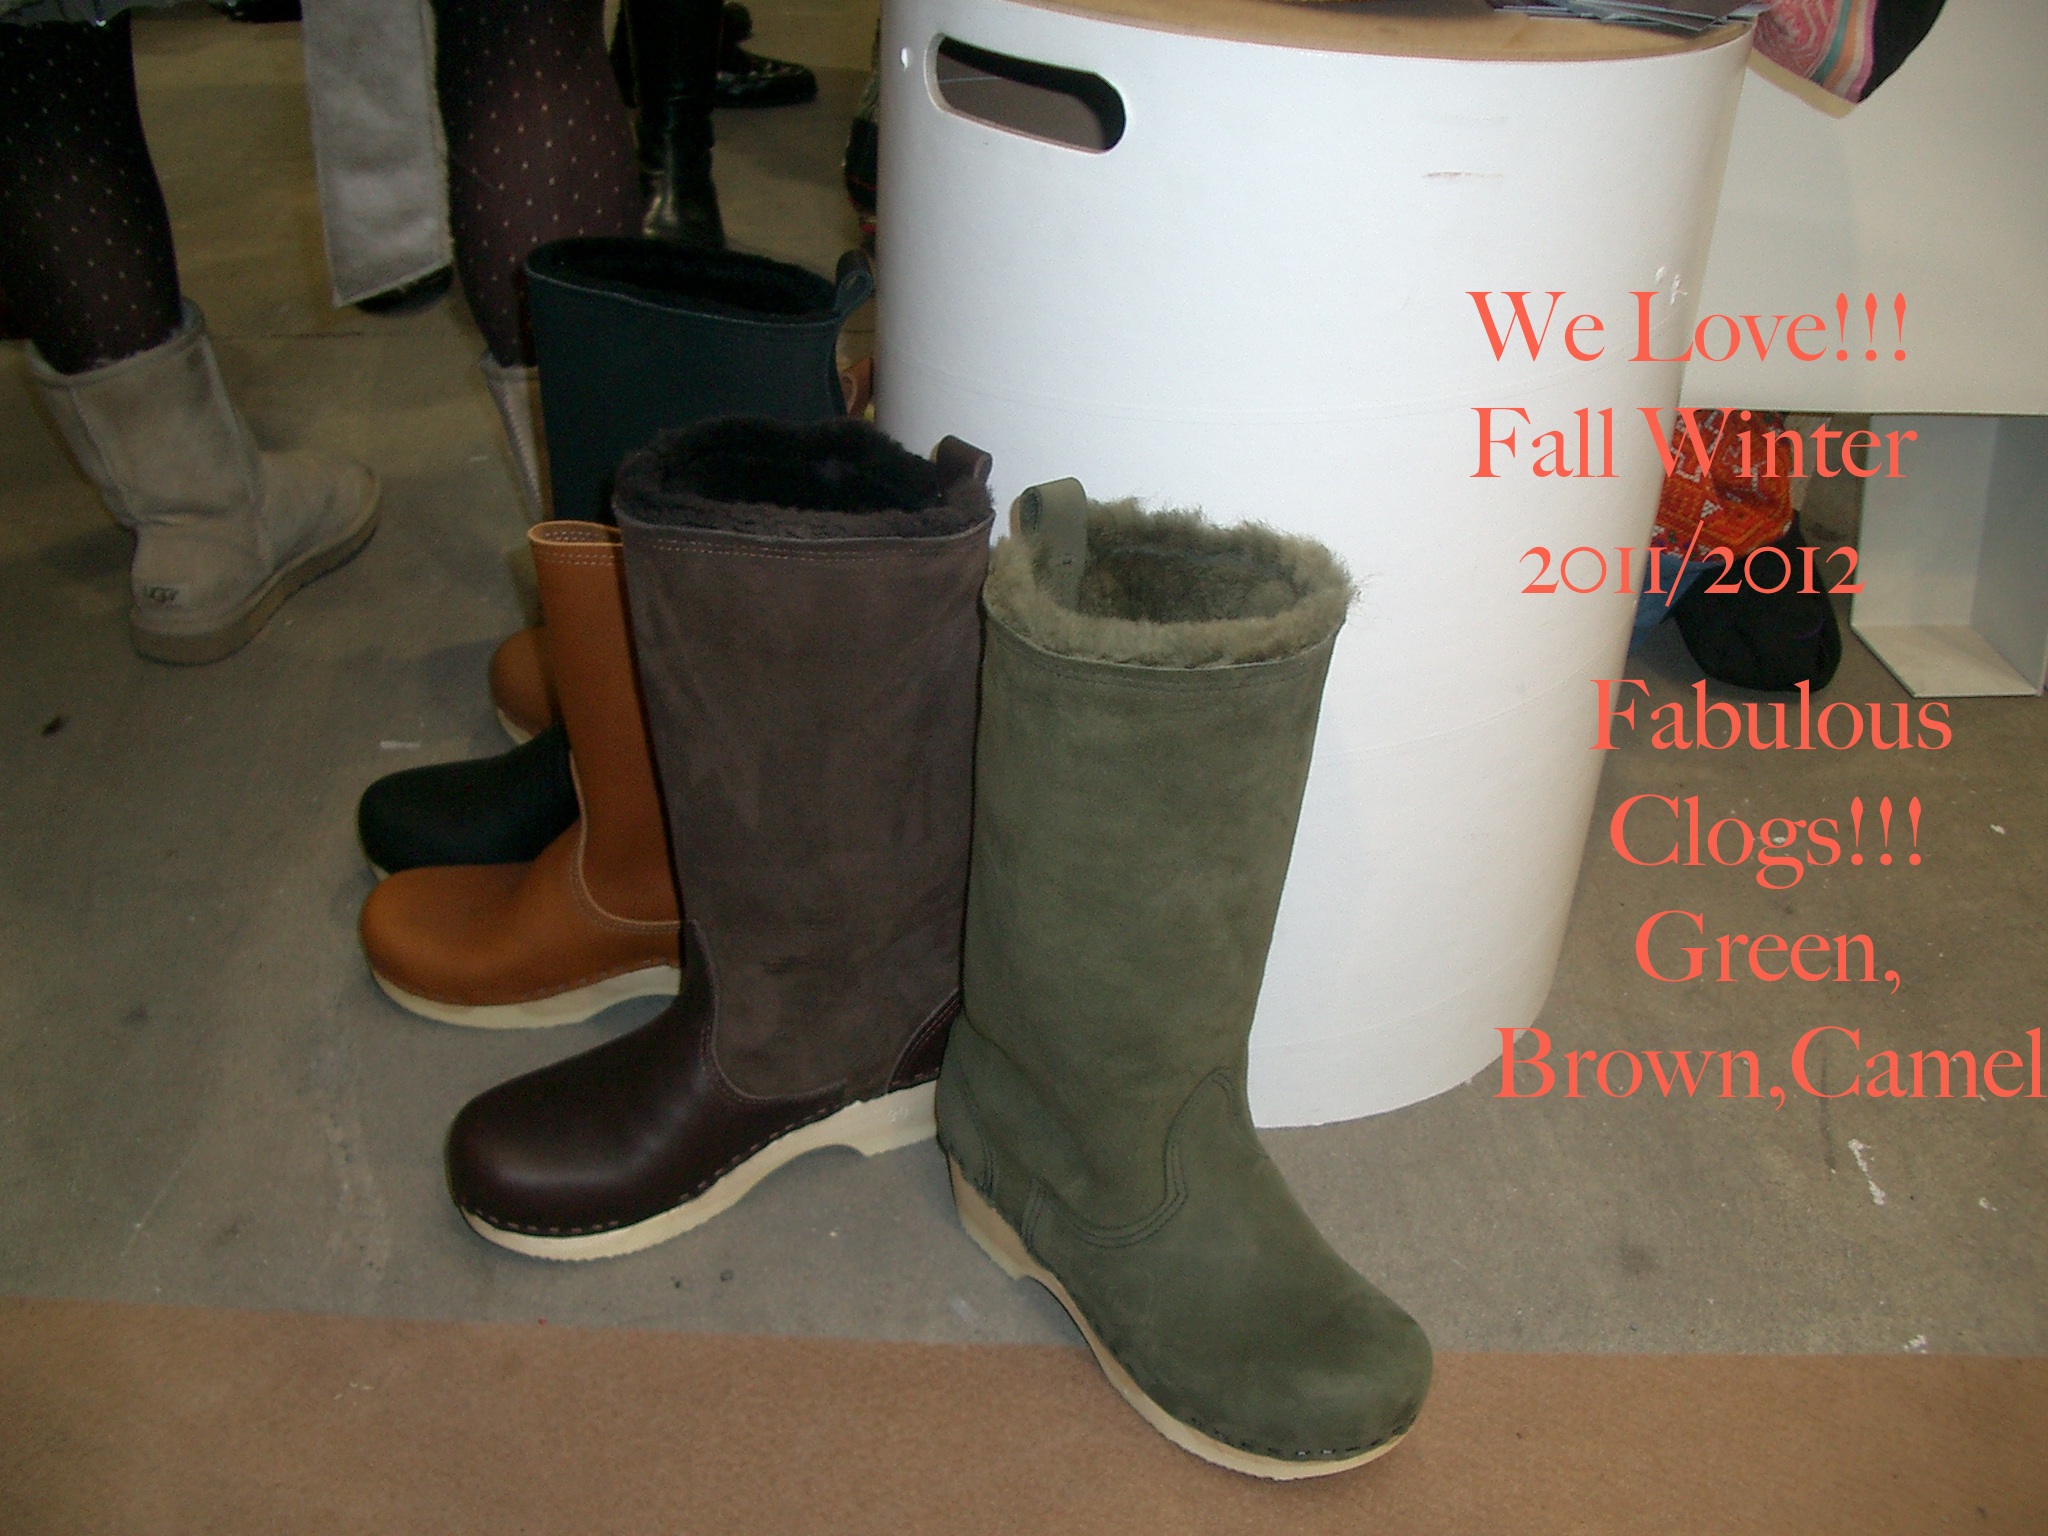 You are currently viewing <!--:en-->Fabulous Clogs are Back!!!!!for Fall Winter 2011/2012<!--:--><!--:de-->Fabulous Clogs are Back!!!!!for Fall Winter 2011/2012<!--:-->